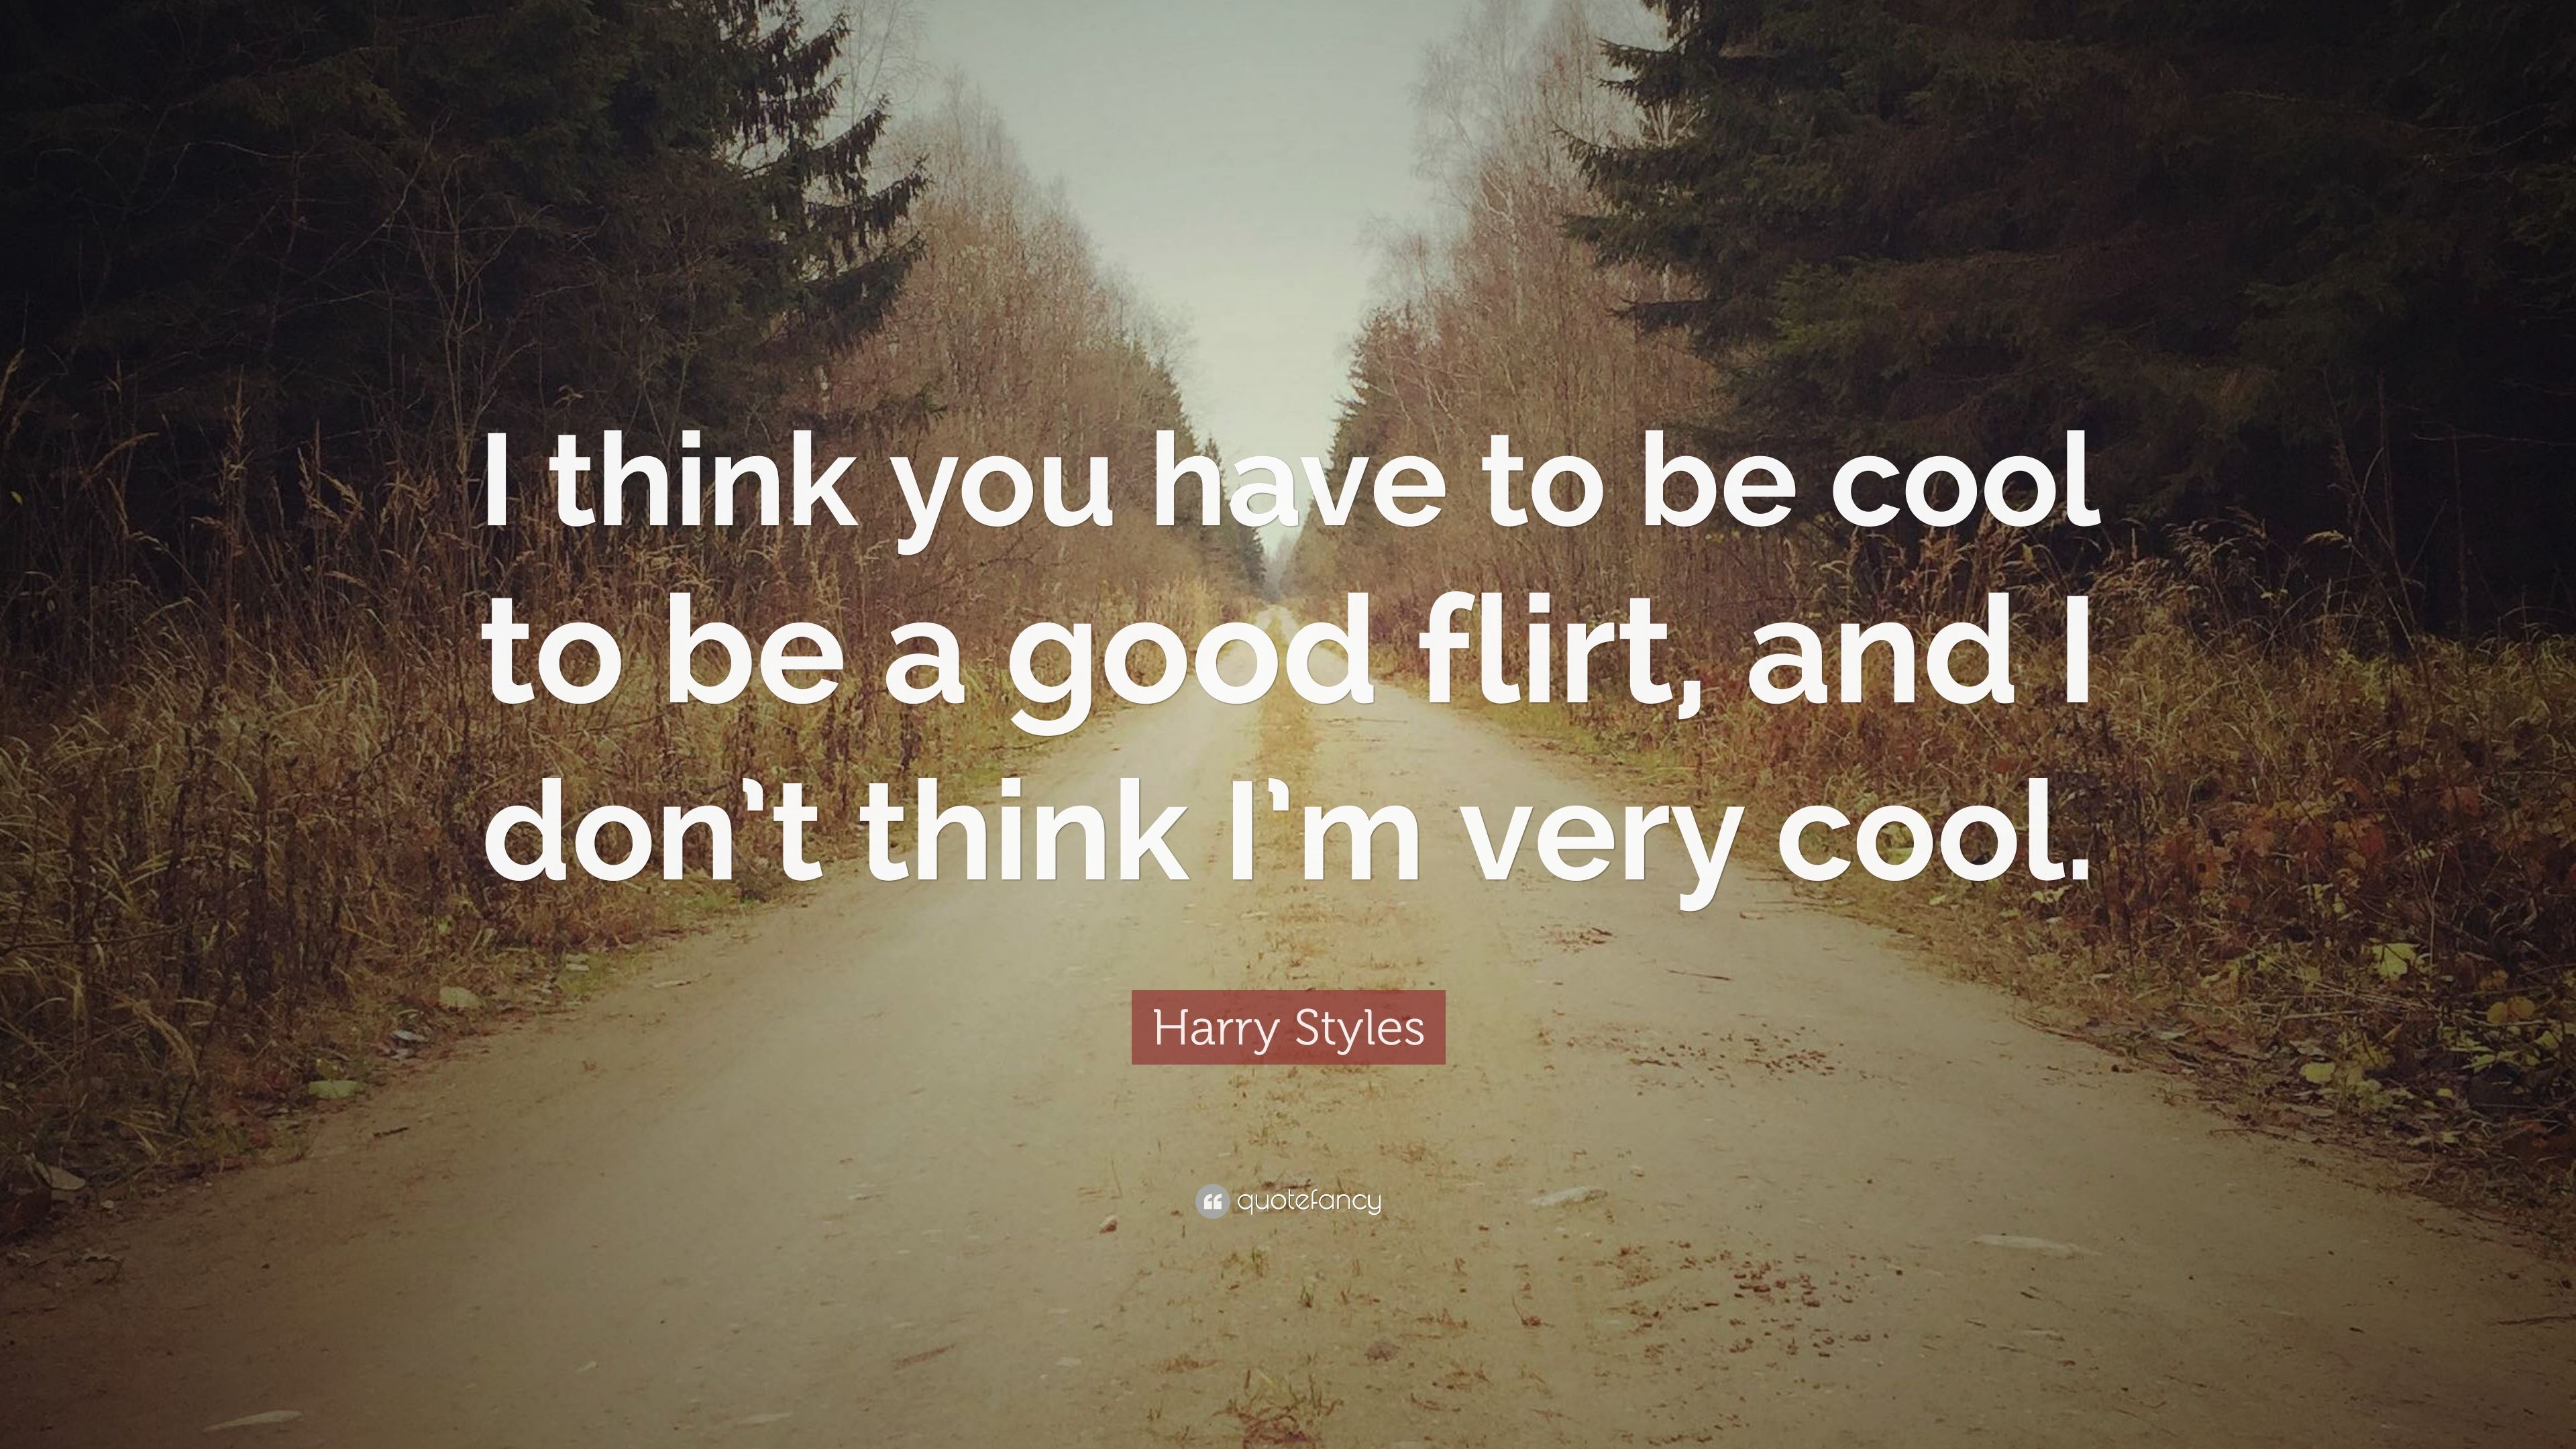 Harry Styles Quote: “I think you have to be cool to be a good flirt, and I don't think I'm very cool.” (12 wallpaper)